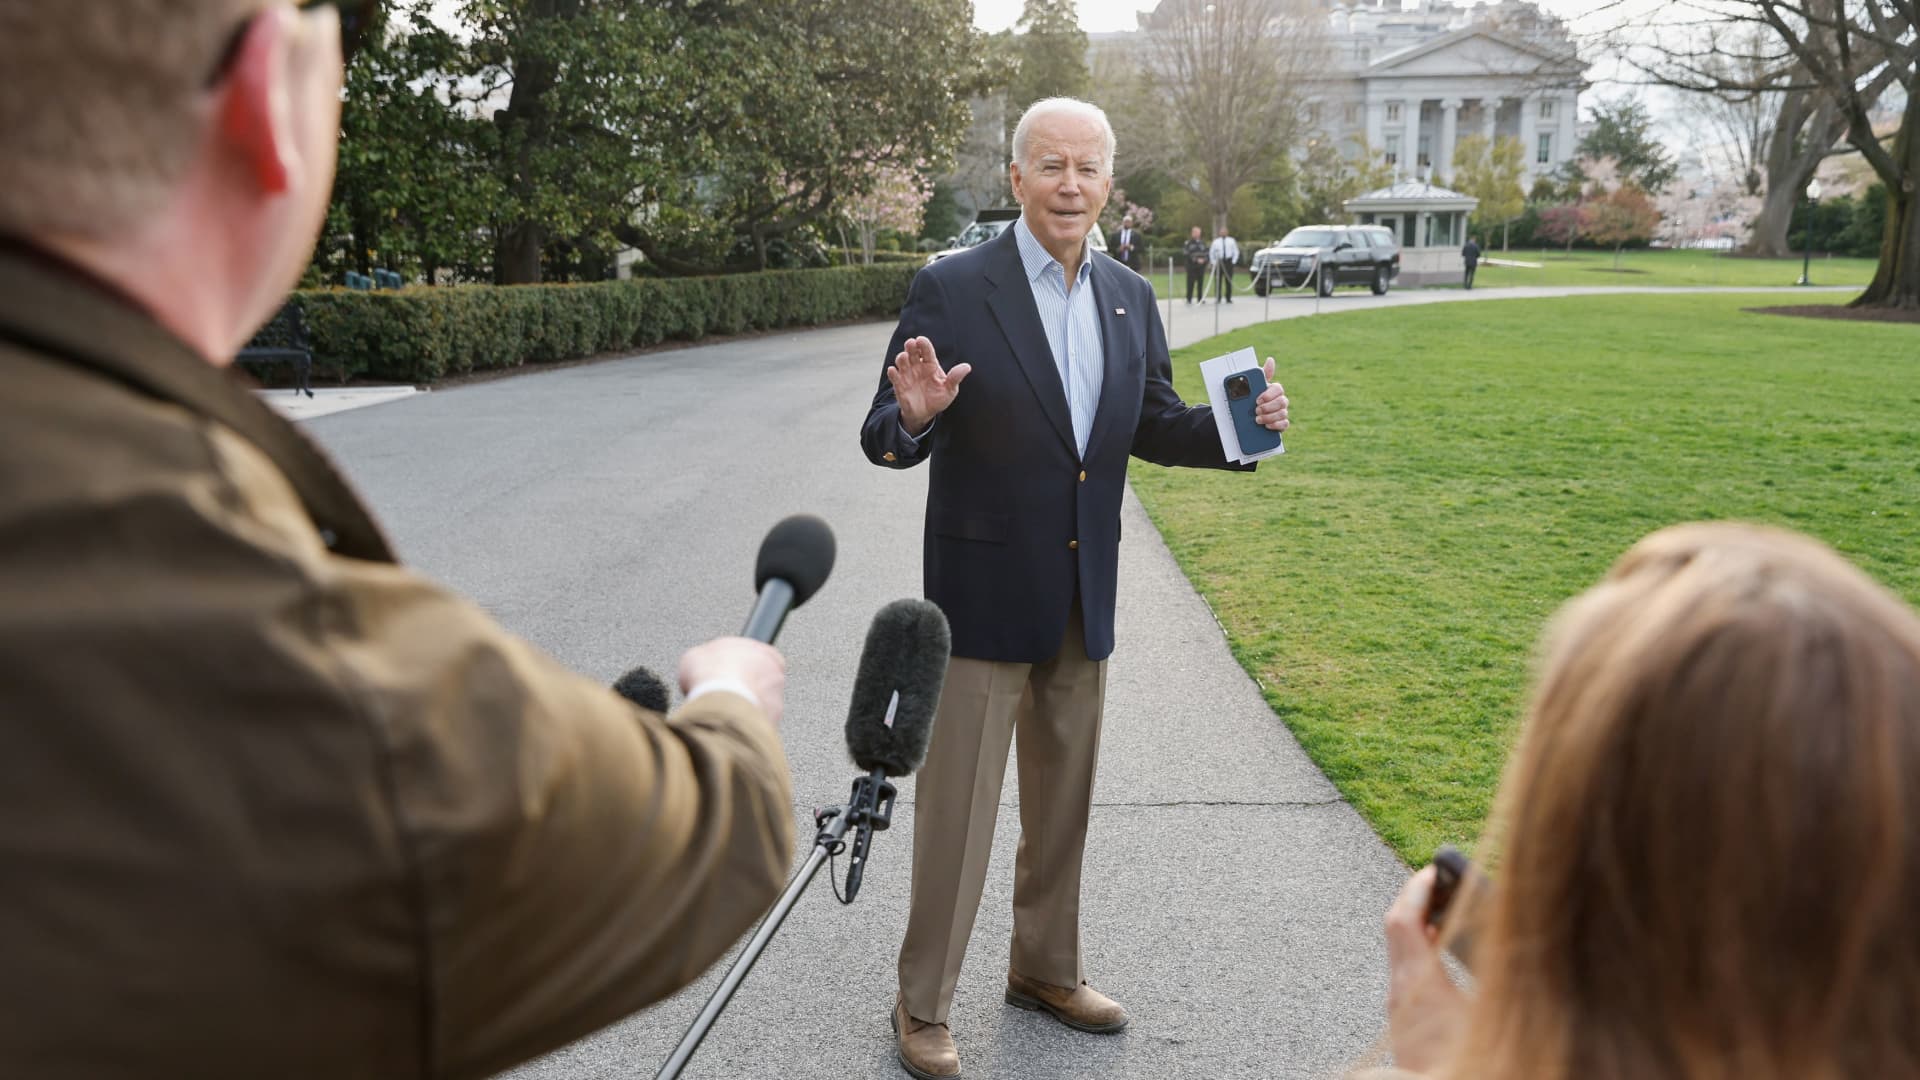 Members of the media ask questions to U.S. President Joe Biden as he walks to the Marine One helicopter to depart for travel to Mississippi to view tornado damage, from the White House in Washington, U.S., March 31, 2023. 